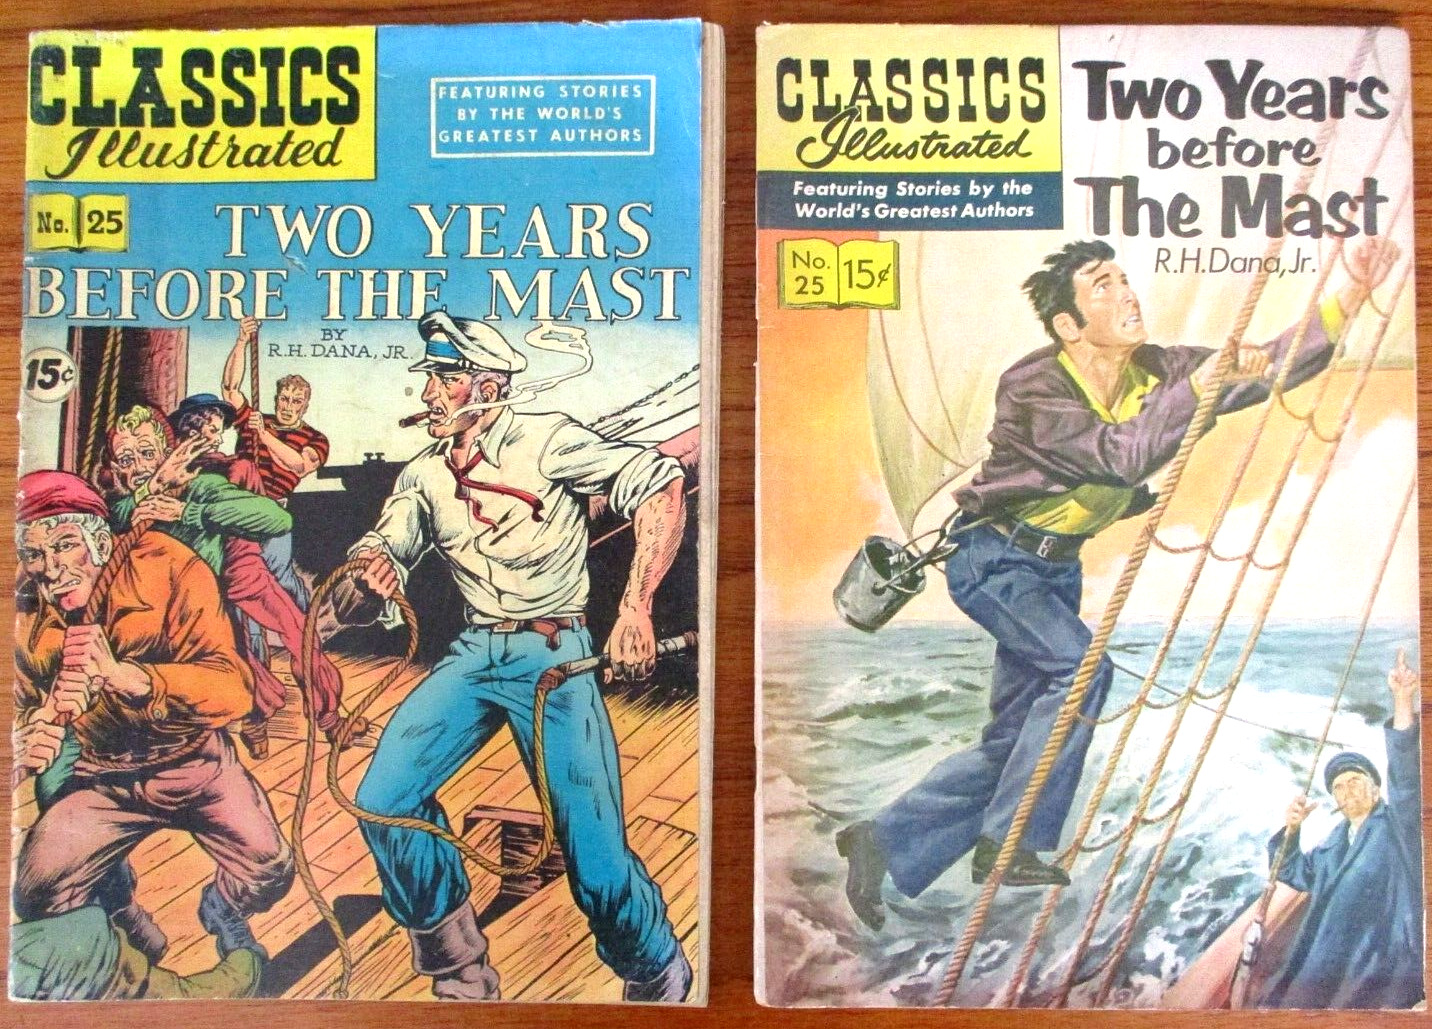 1951 + \'65 CLASSICS ILLUSTRATED COMICS 2 Two Years Before #25 1951 + 1965